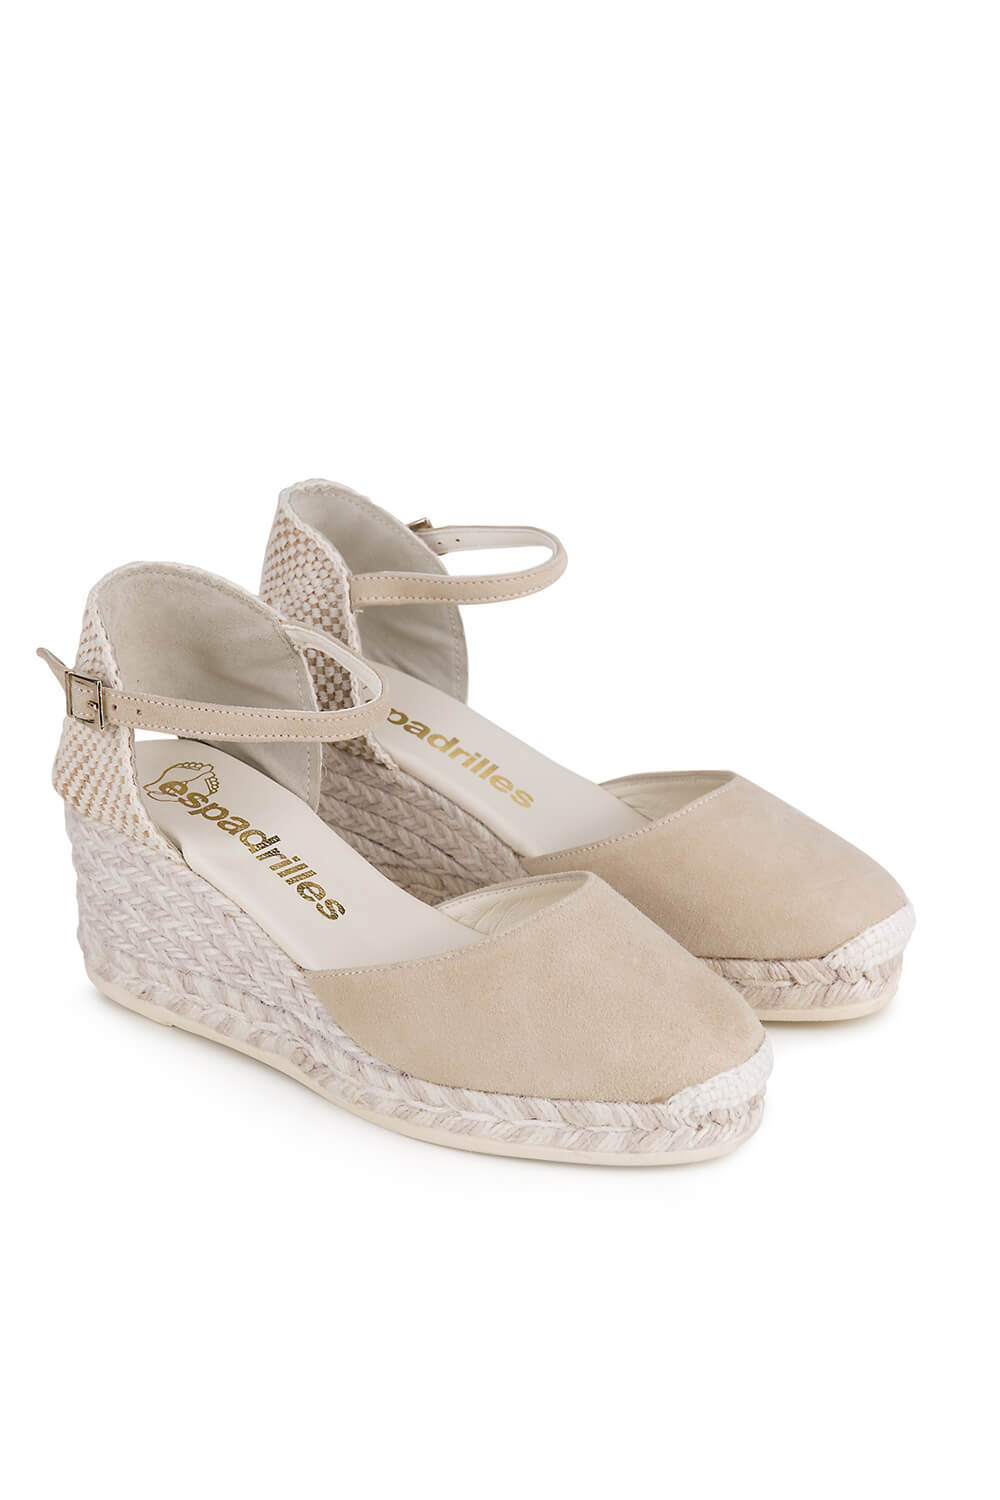 6 cm high cream colored closed suede leather toe wedge.